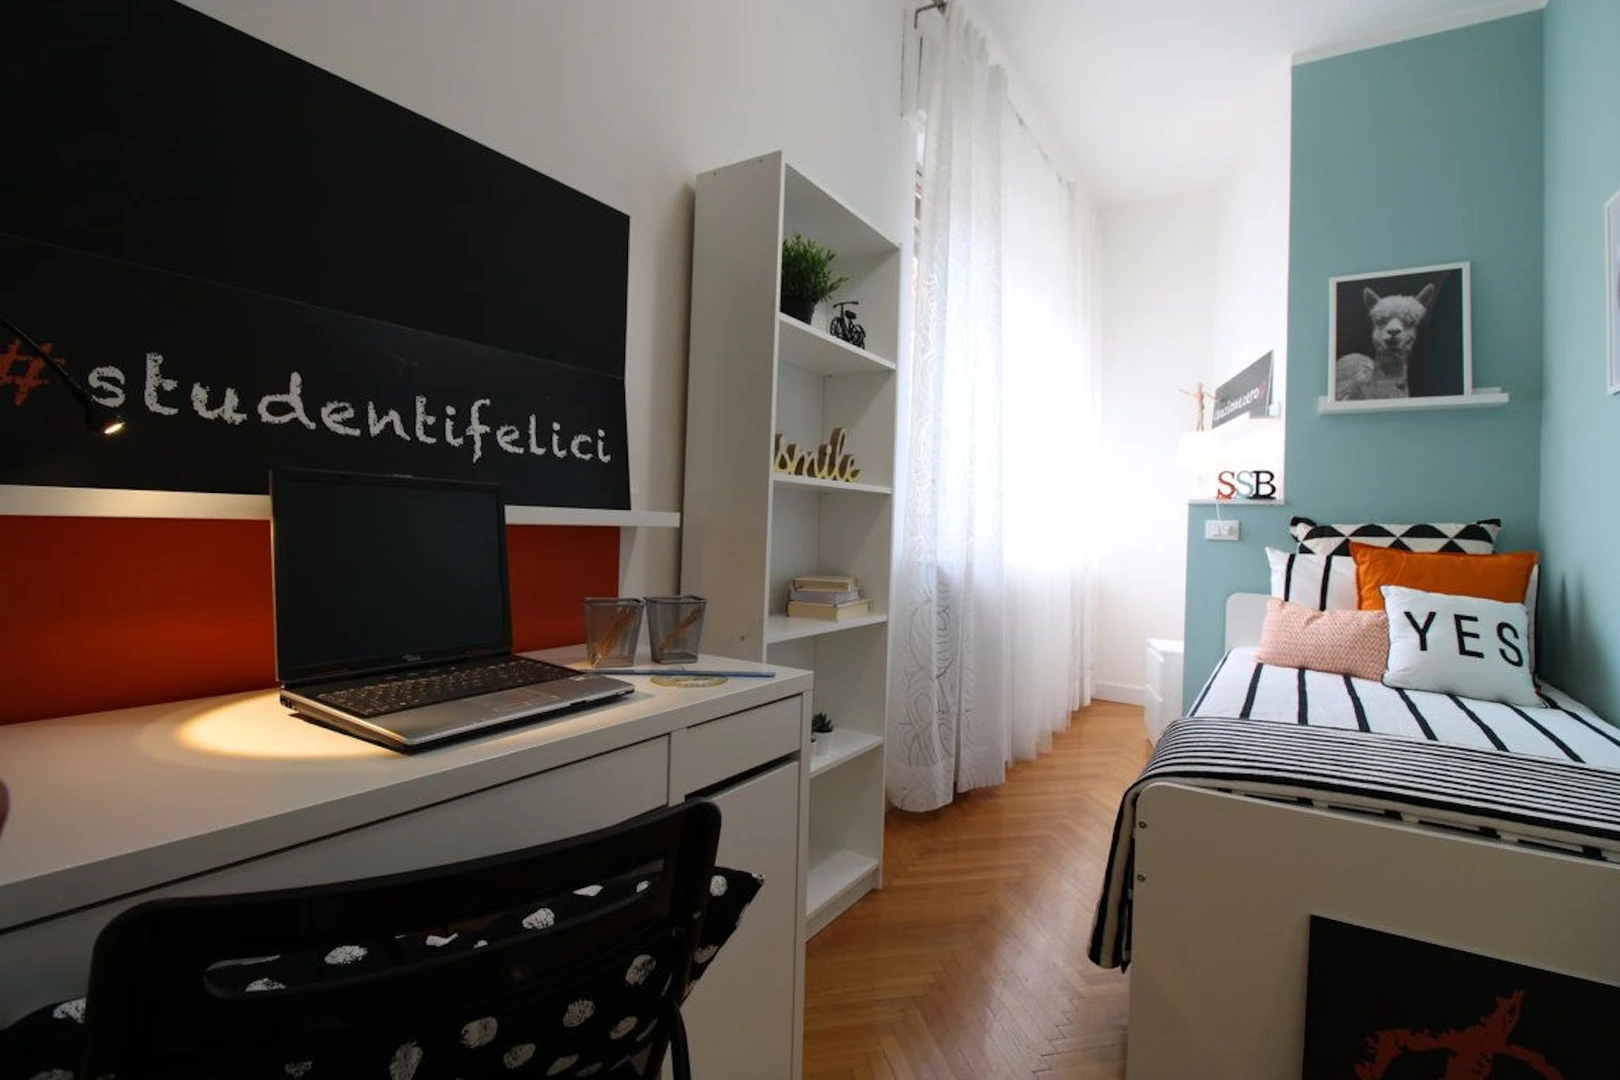 Room for rent in a shared flat in Modena